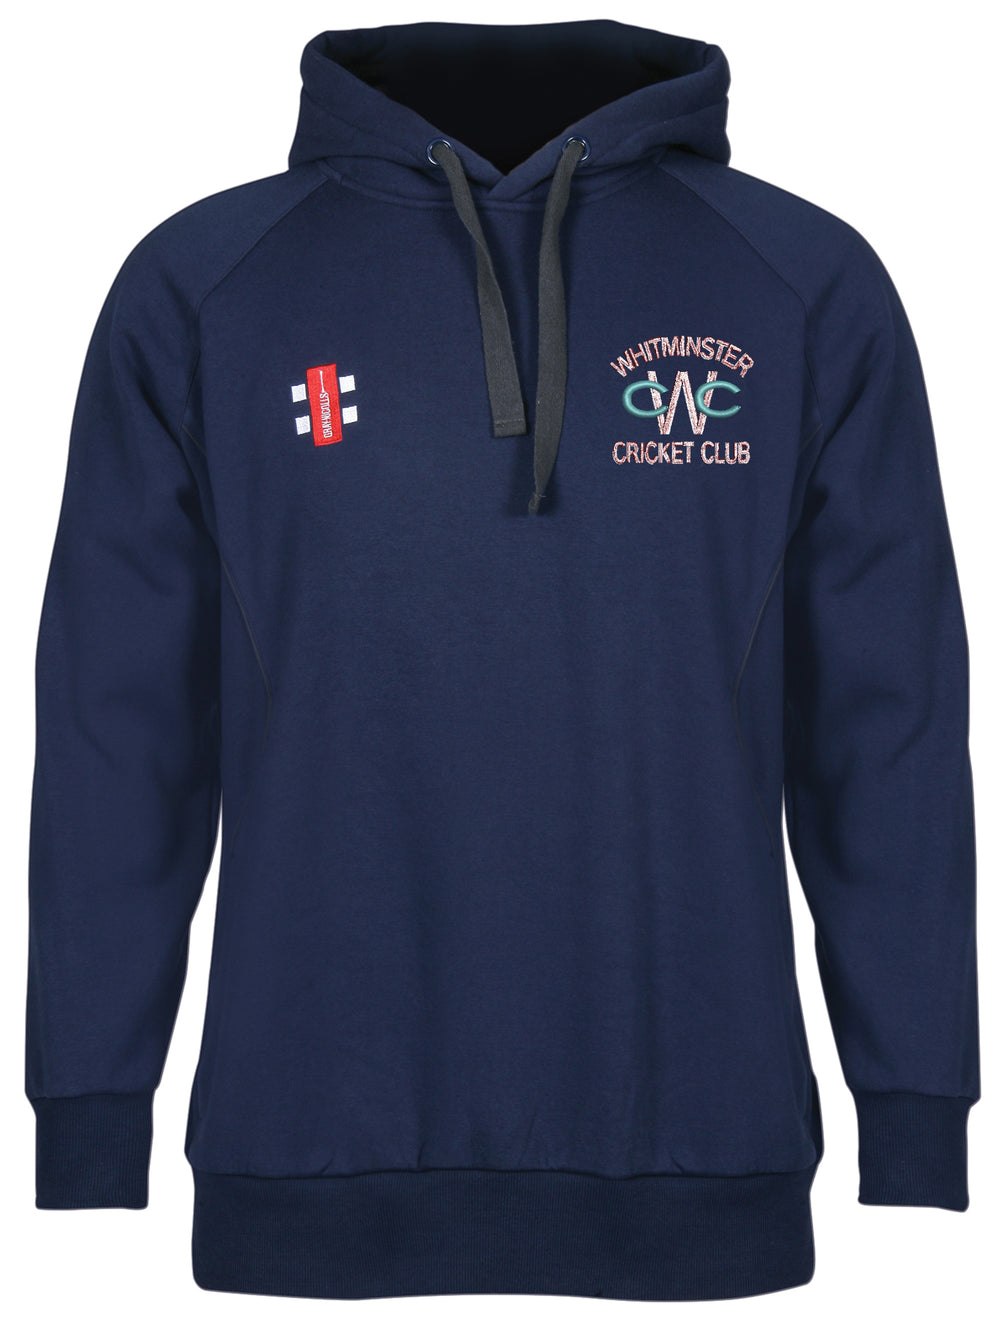 Whitminster CC Storm Hoodie